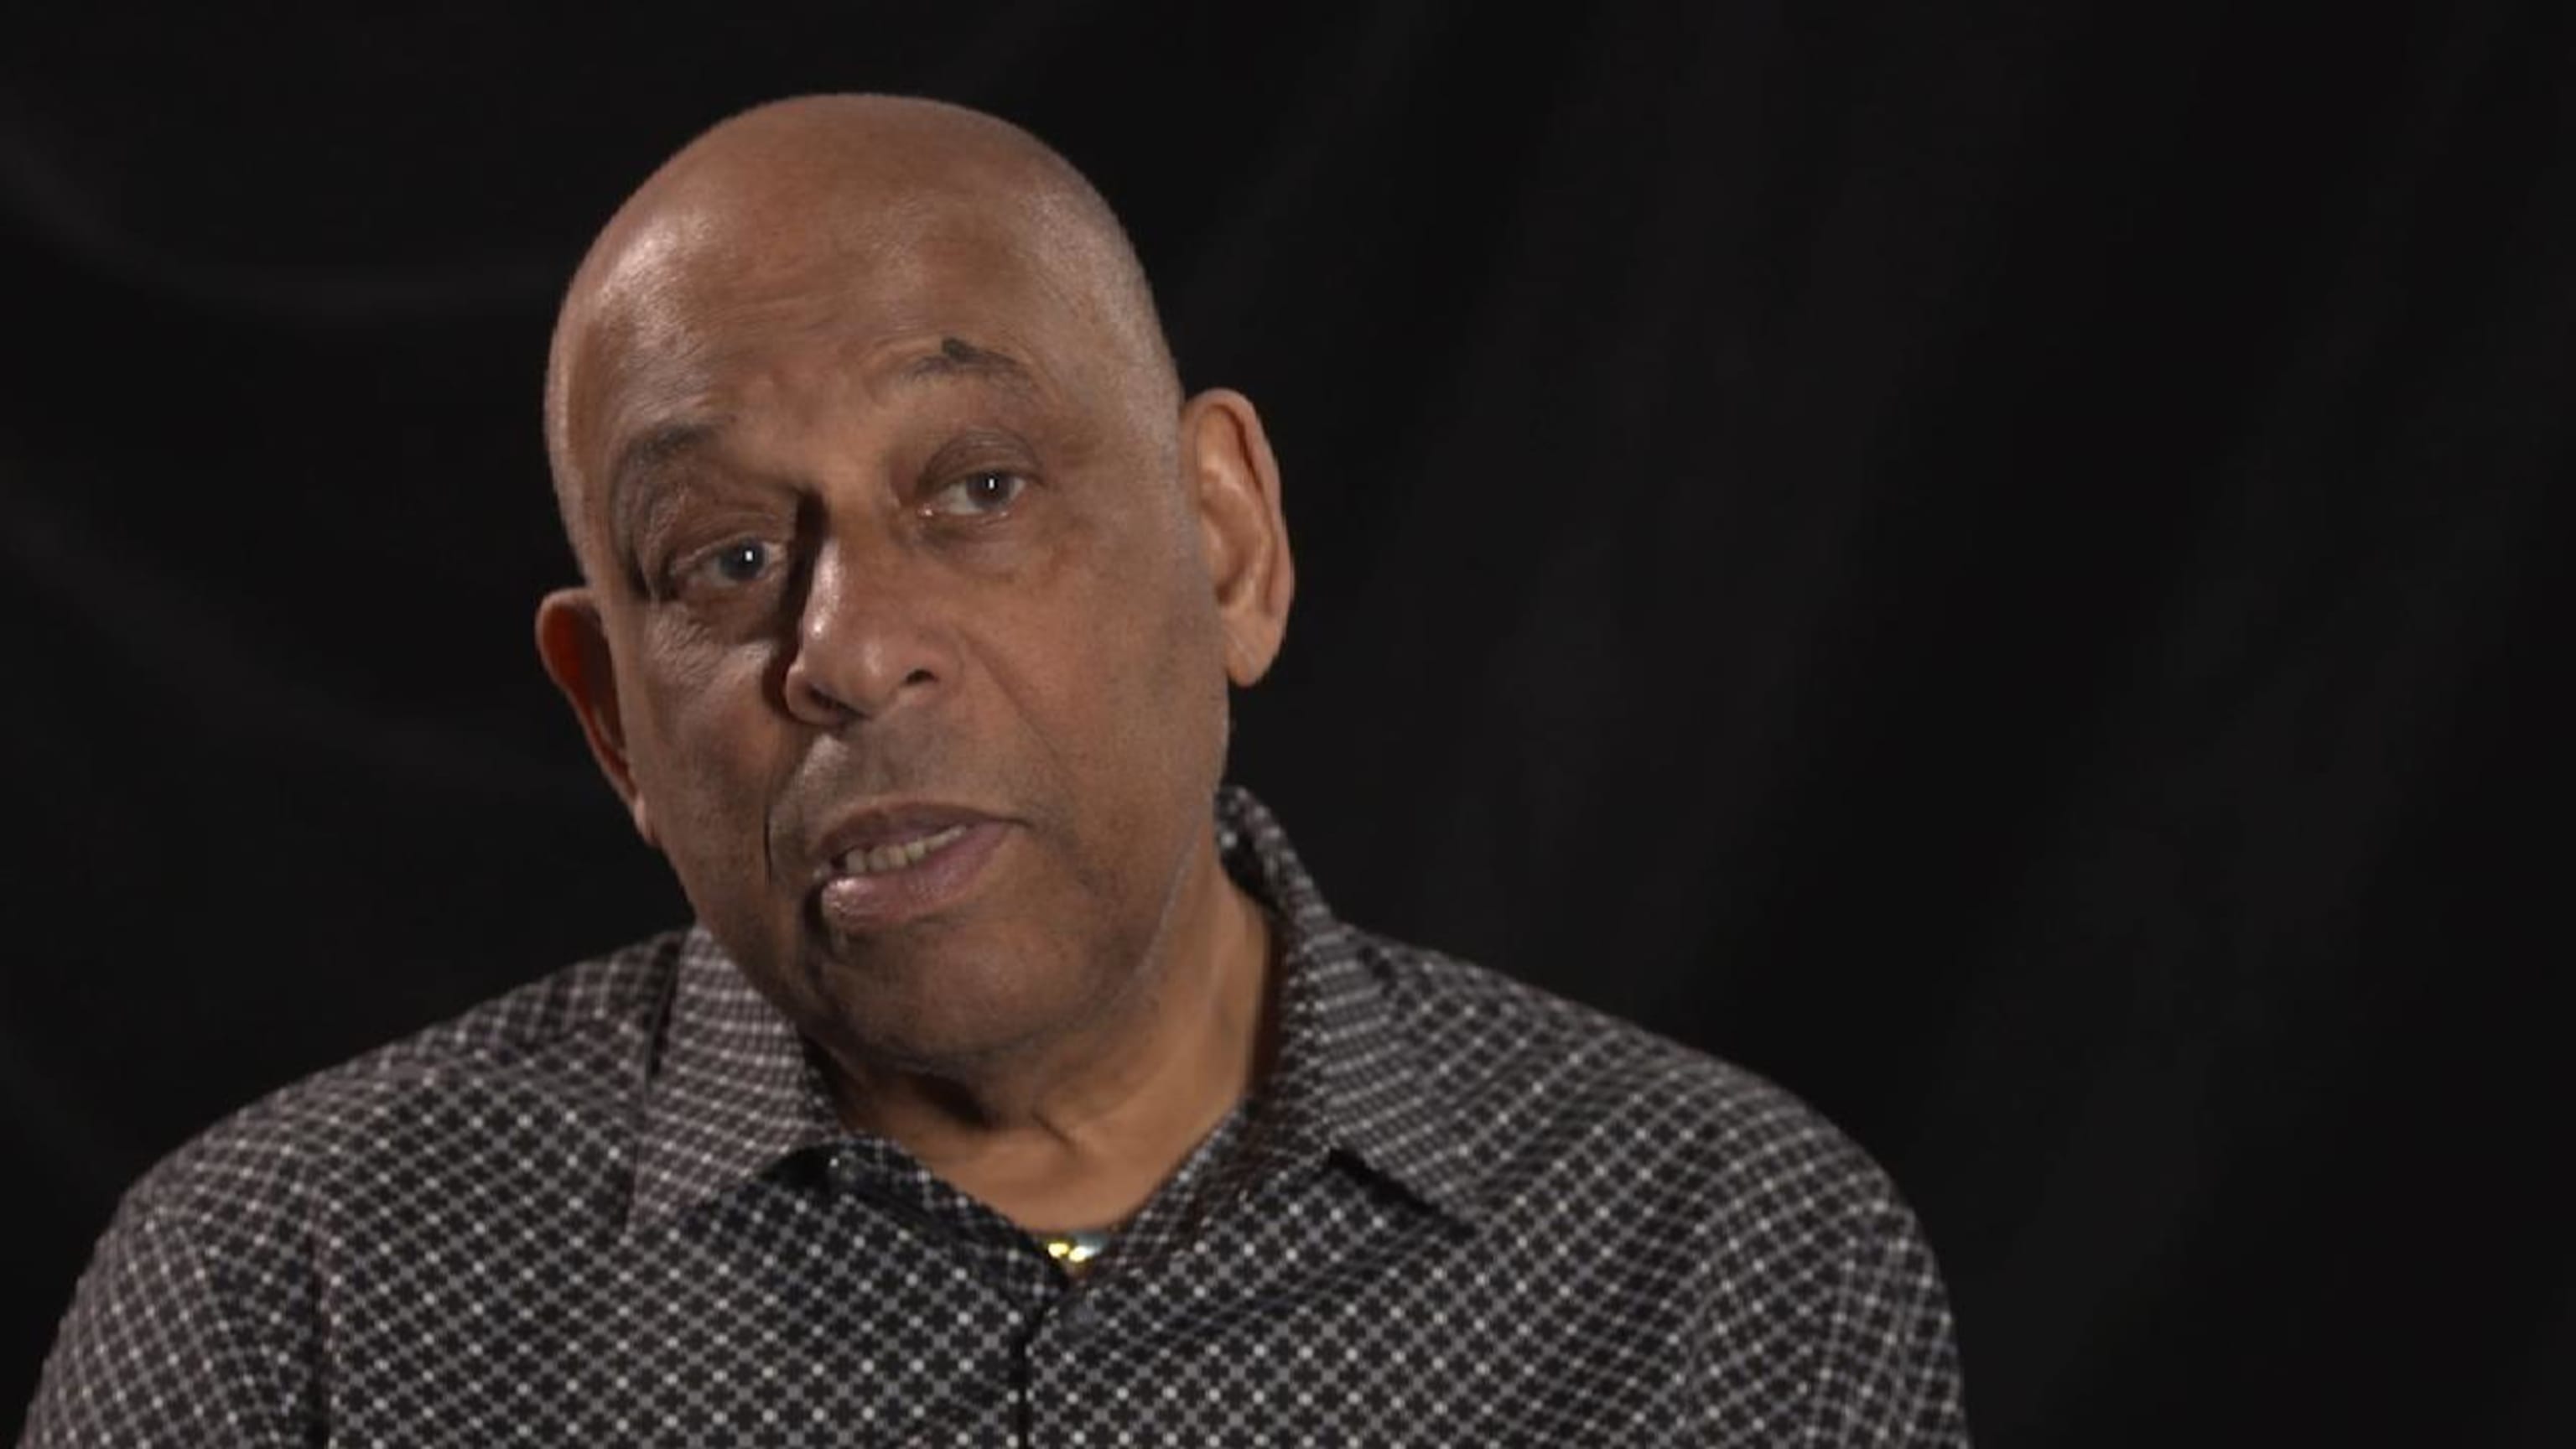 Orlando Cepeda – St Louis Sports Hall of Fame